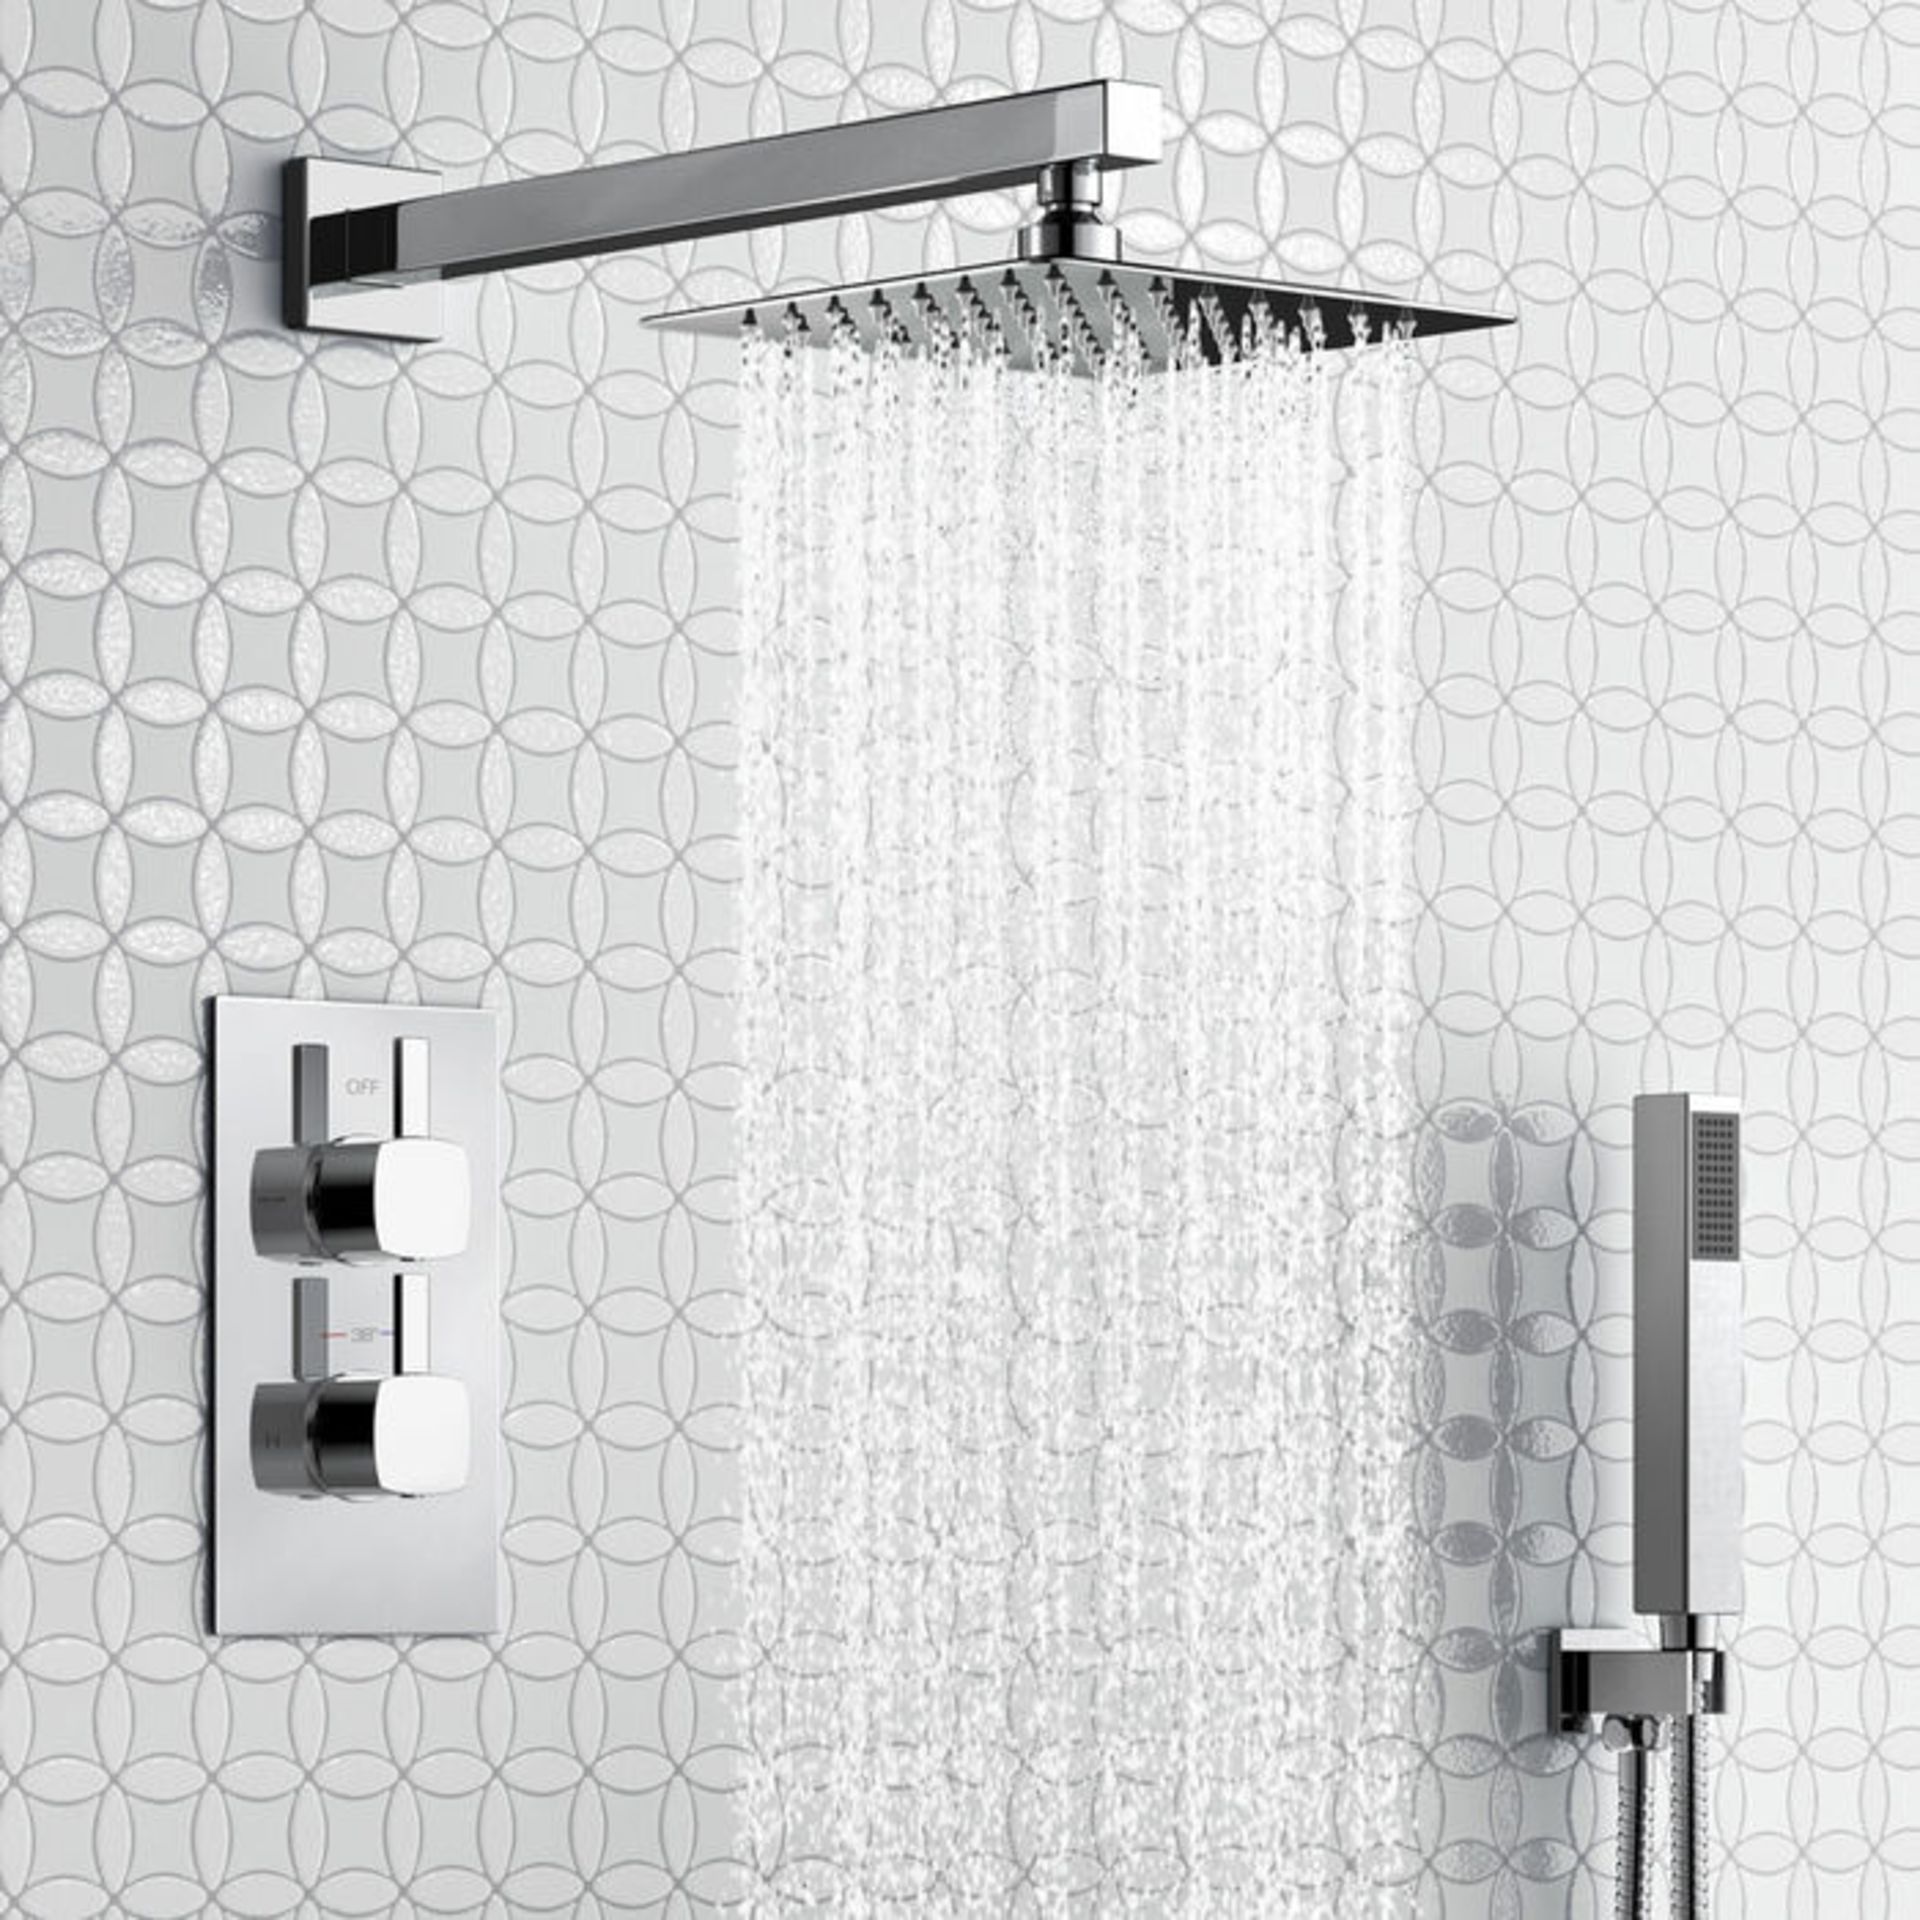 (AL25) Square Concealed Thermostatic Mixer Shower Kit & Medium Head. Family friendly detachable hand